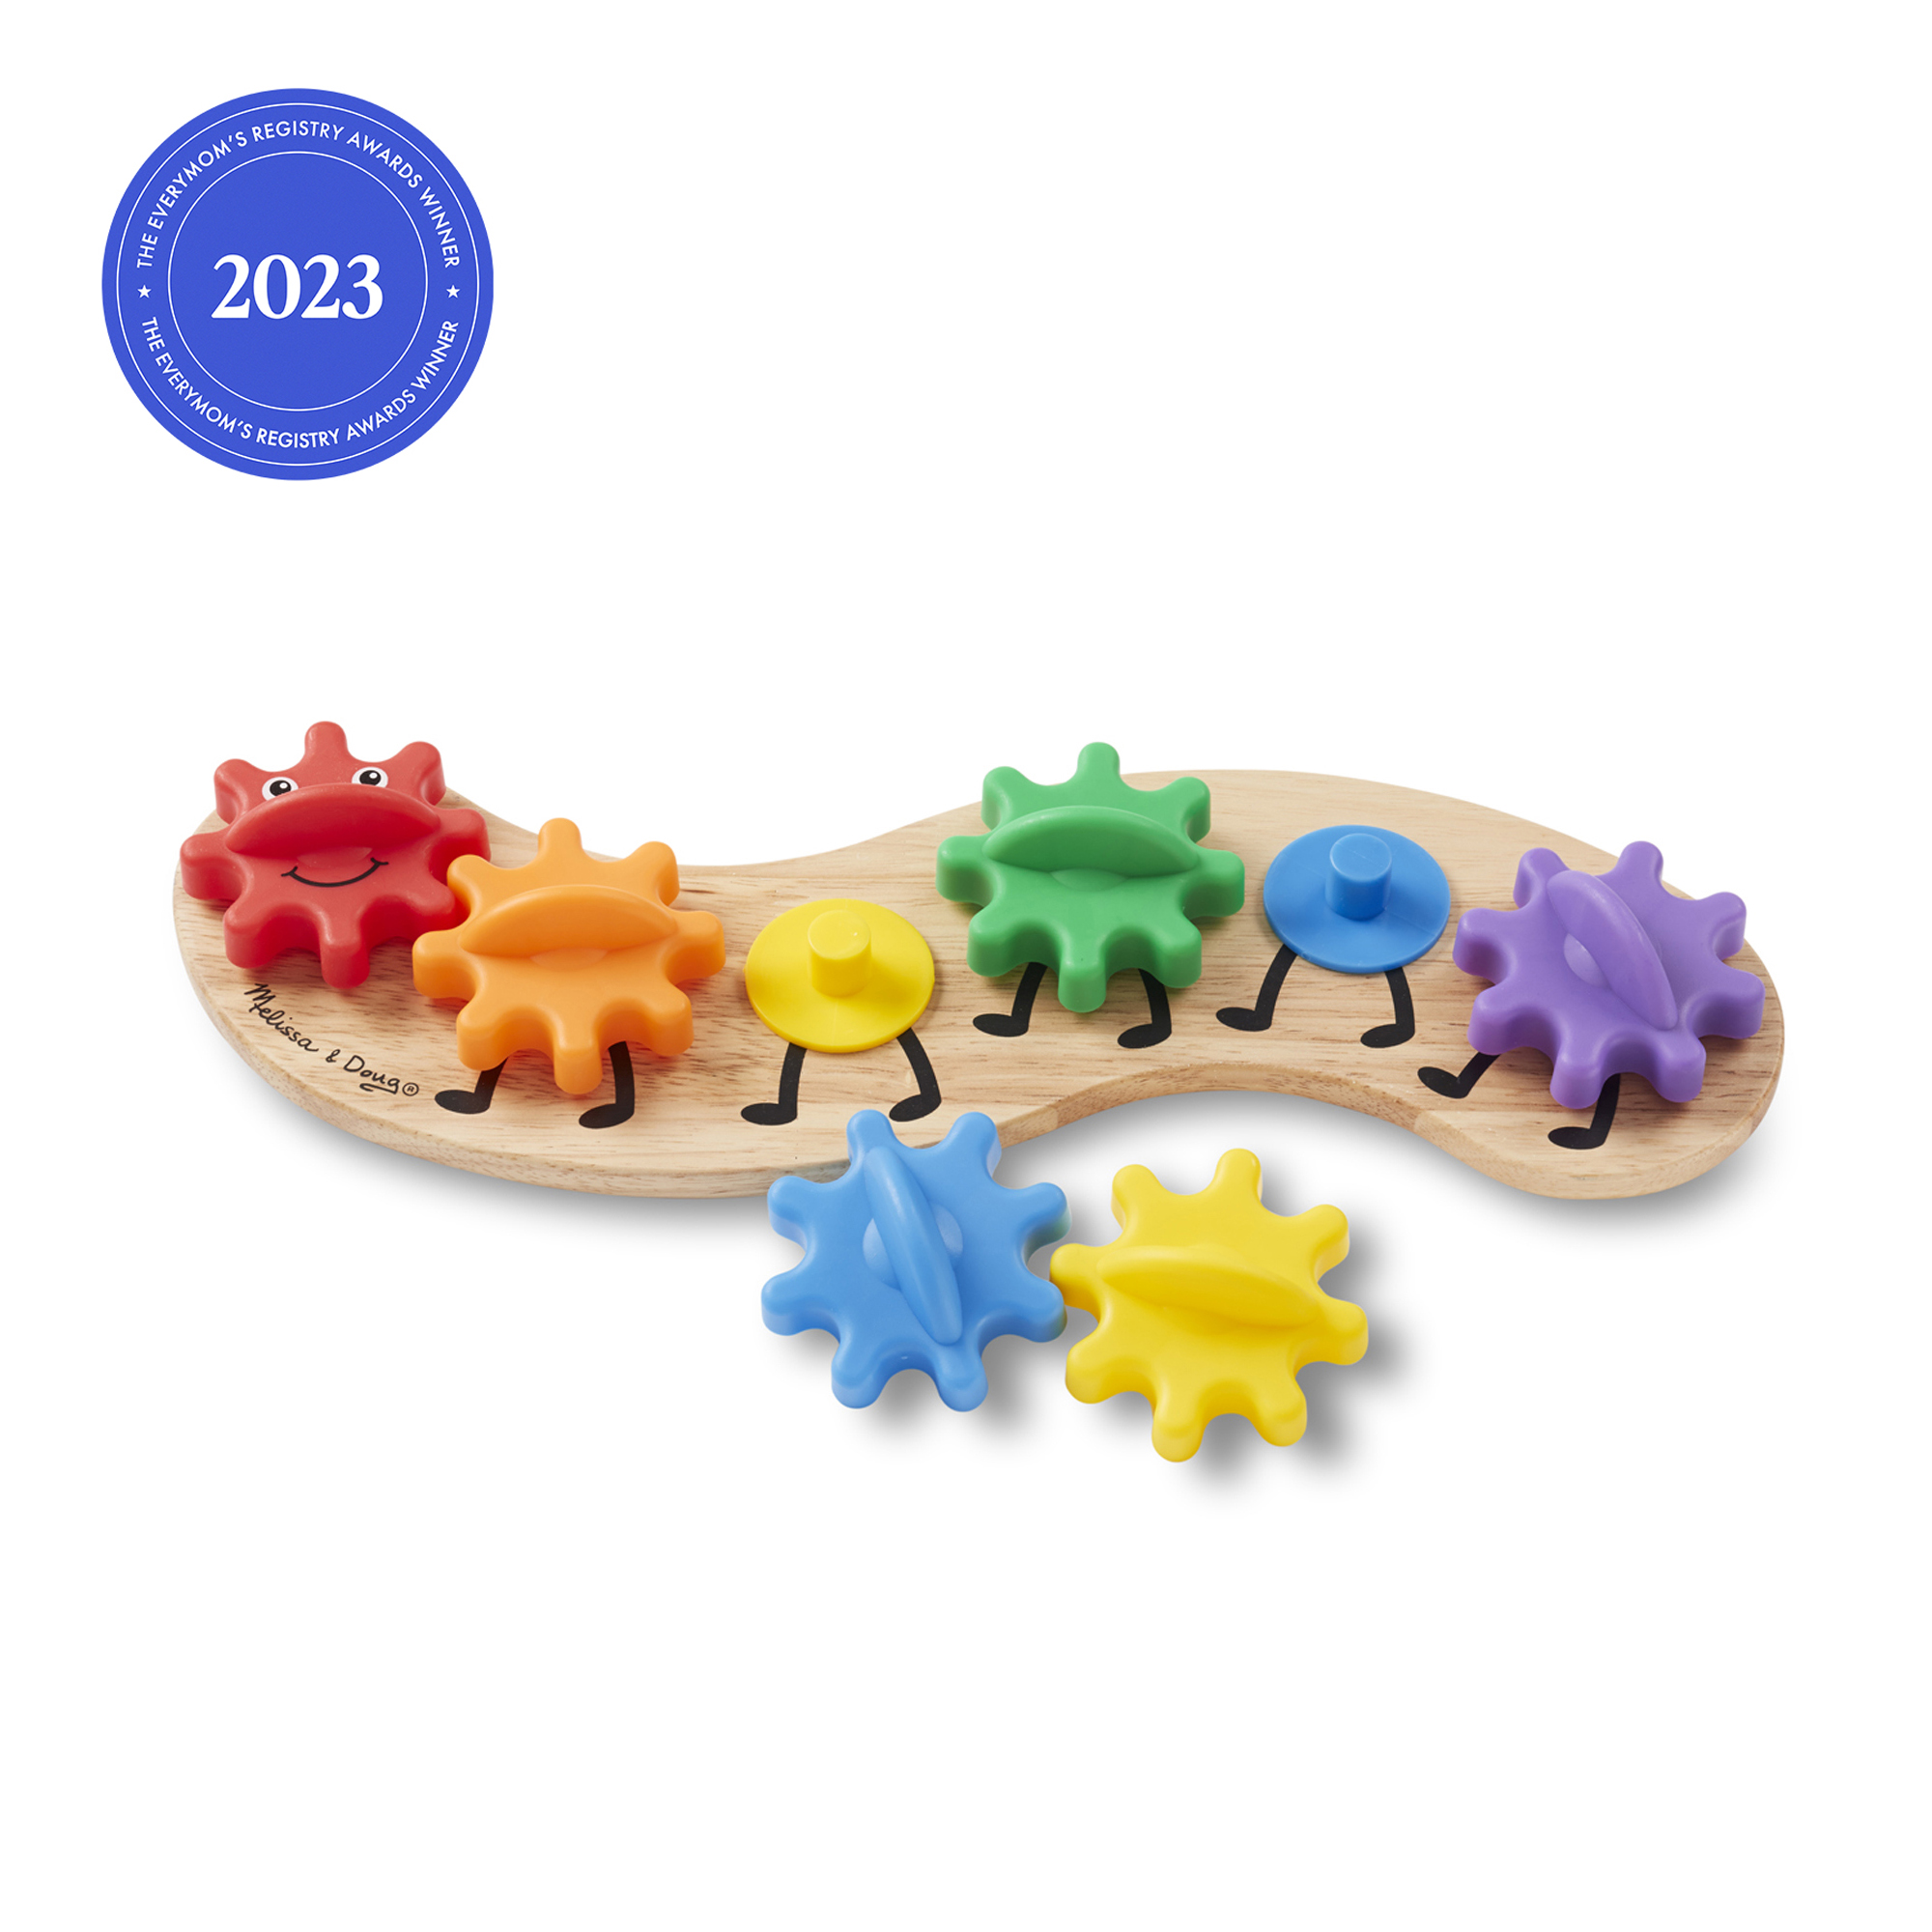 Melissa & Doug Wooden Rainbow Caterpillar Gears Toddler Toy With 6 Interchangeable Gears - image 1 of 10